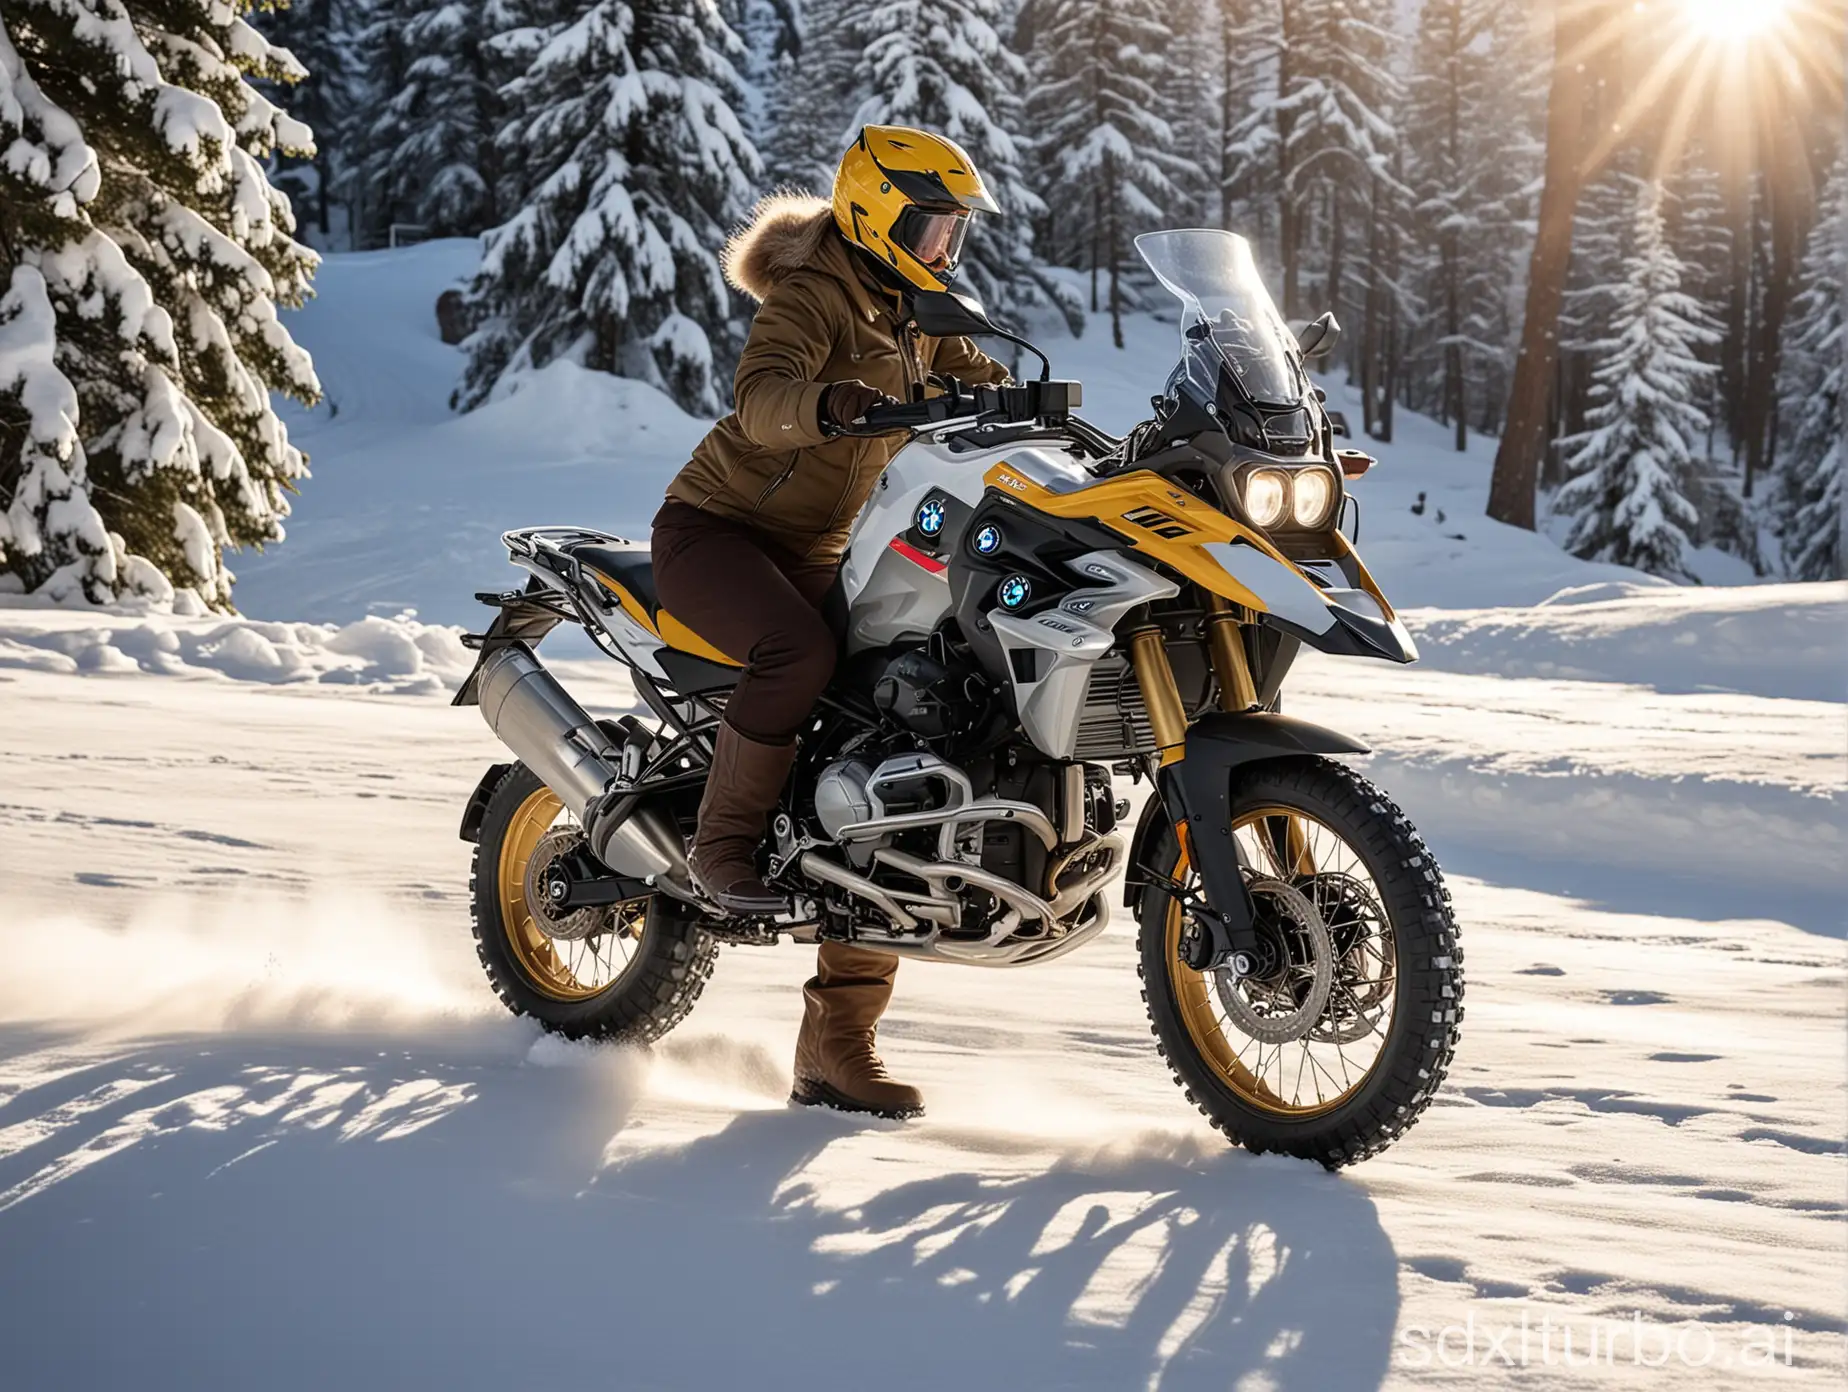 BMW-R1250GS-Motorcycle-Riding-Woman-in-Alpine-Snowy-Landscape-with-Dynamic-Lean-Angle